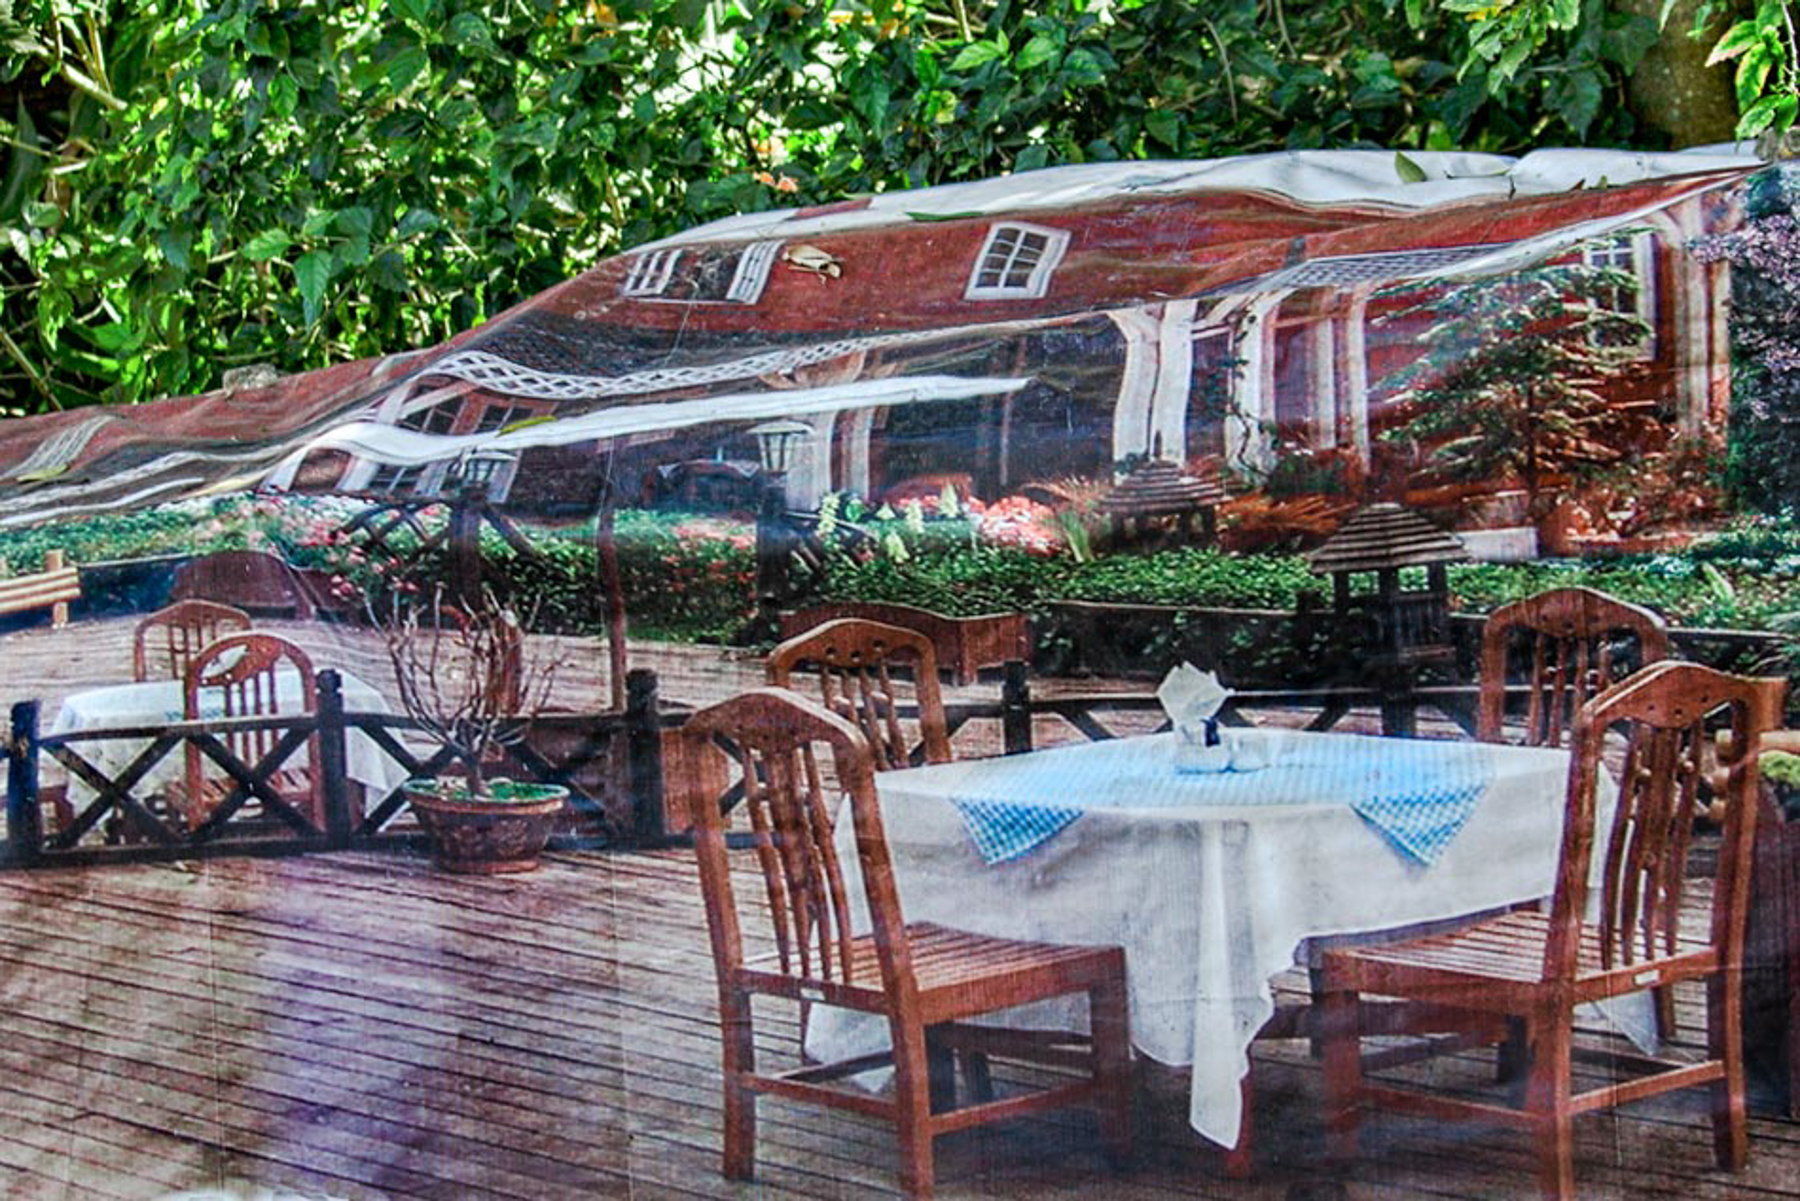 A mural of a house in the background with a table set with chairs.